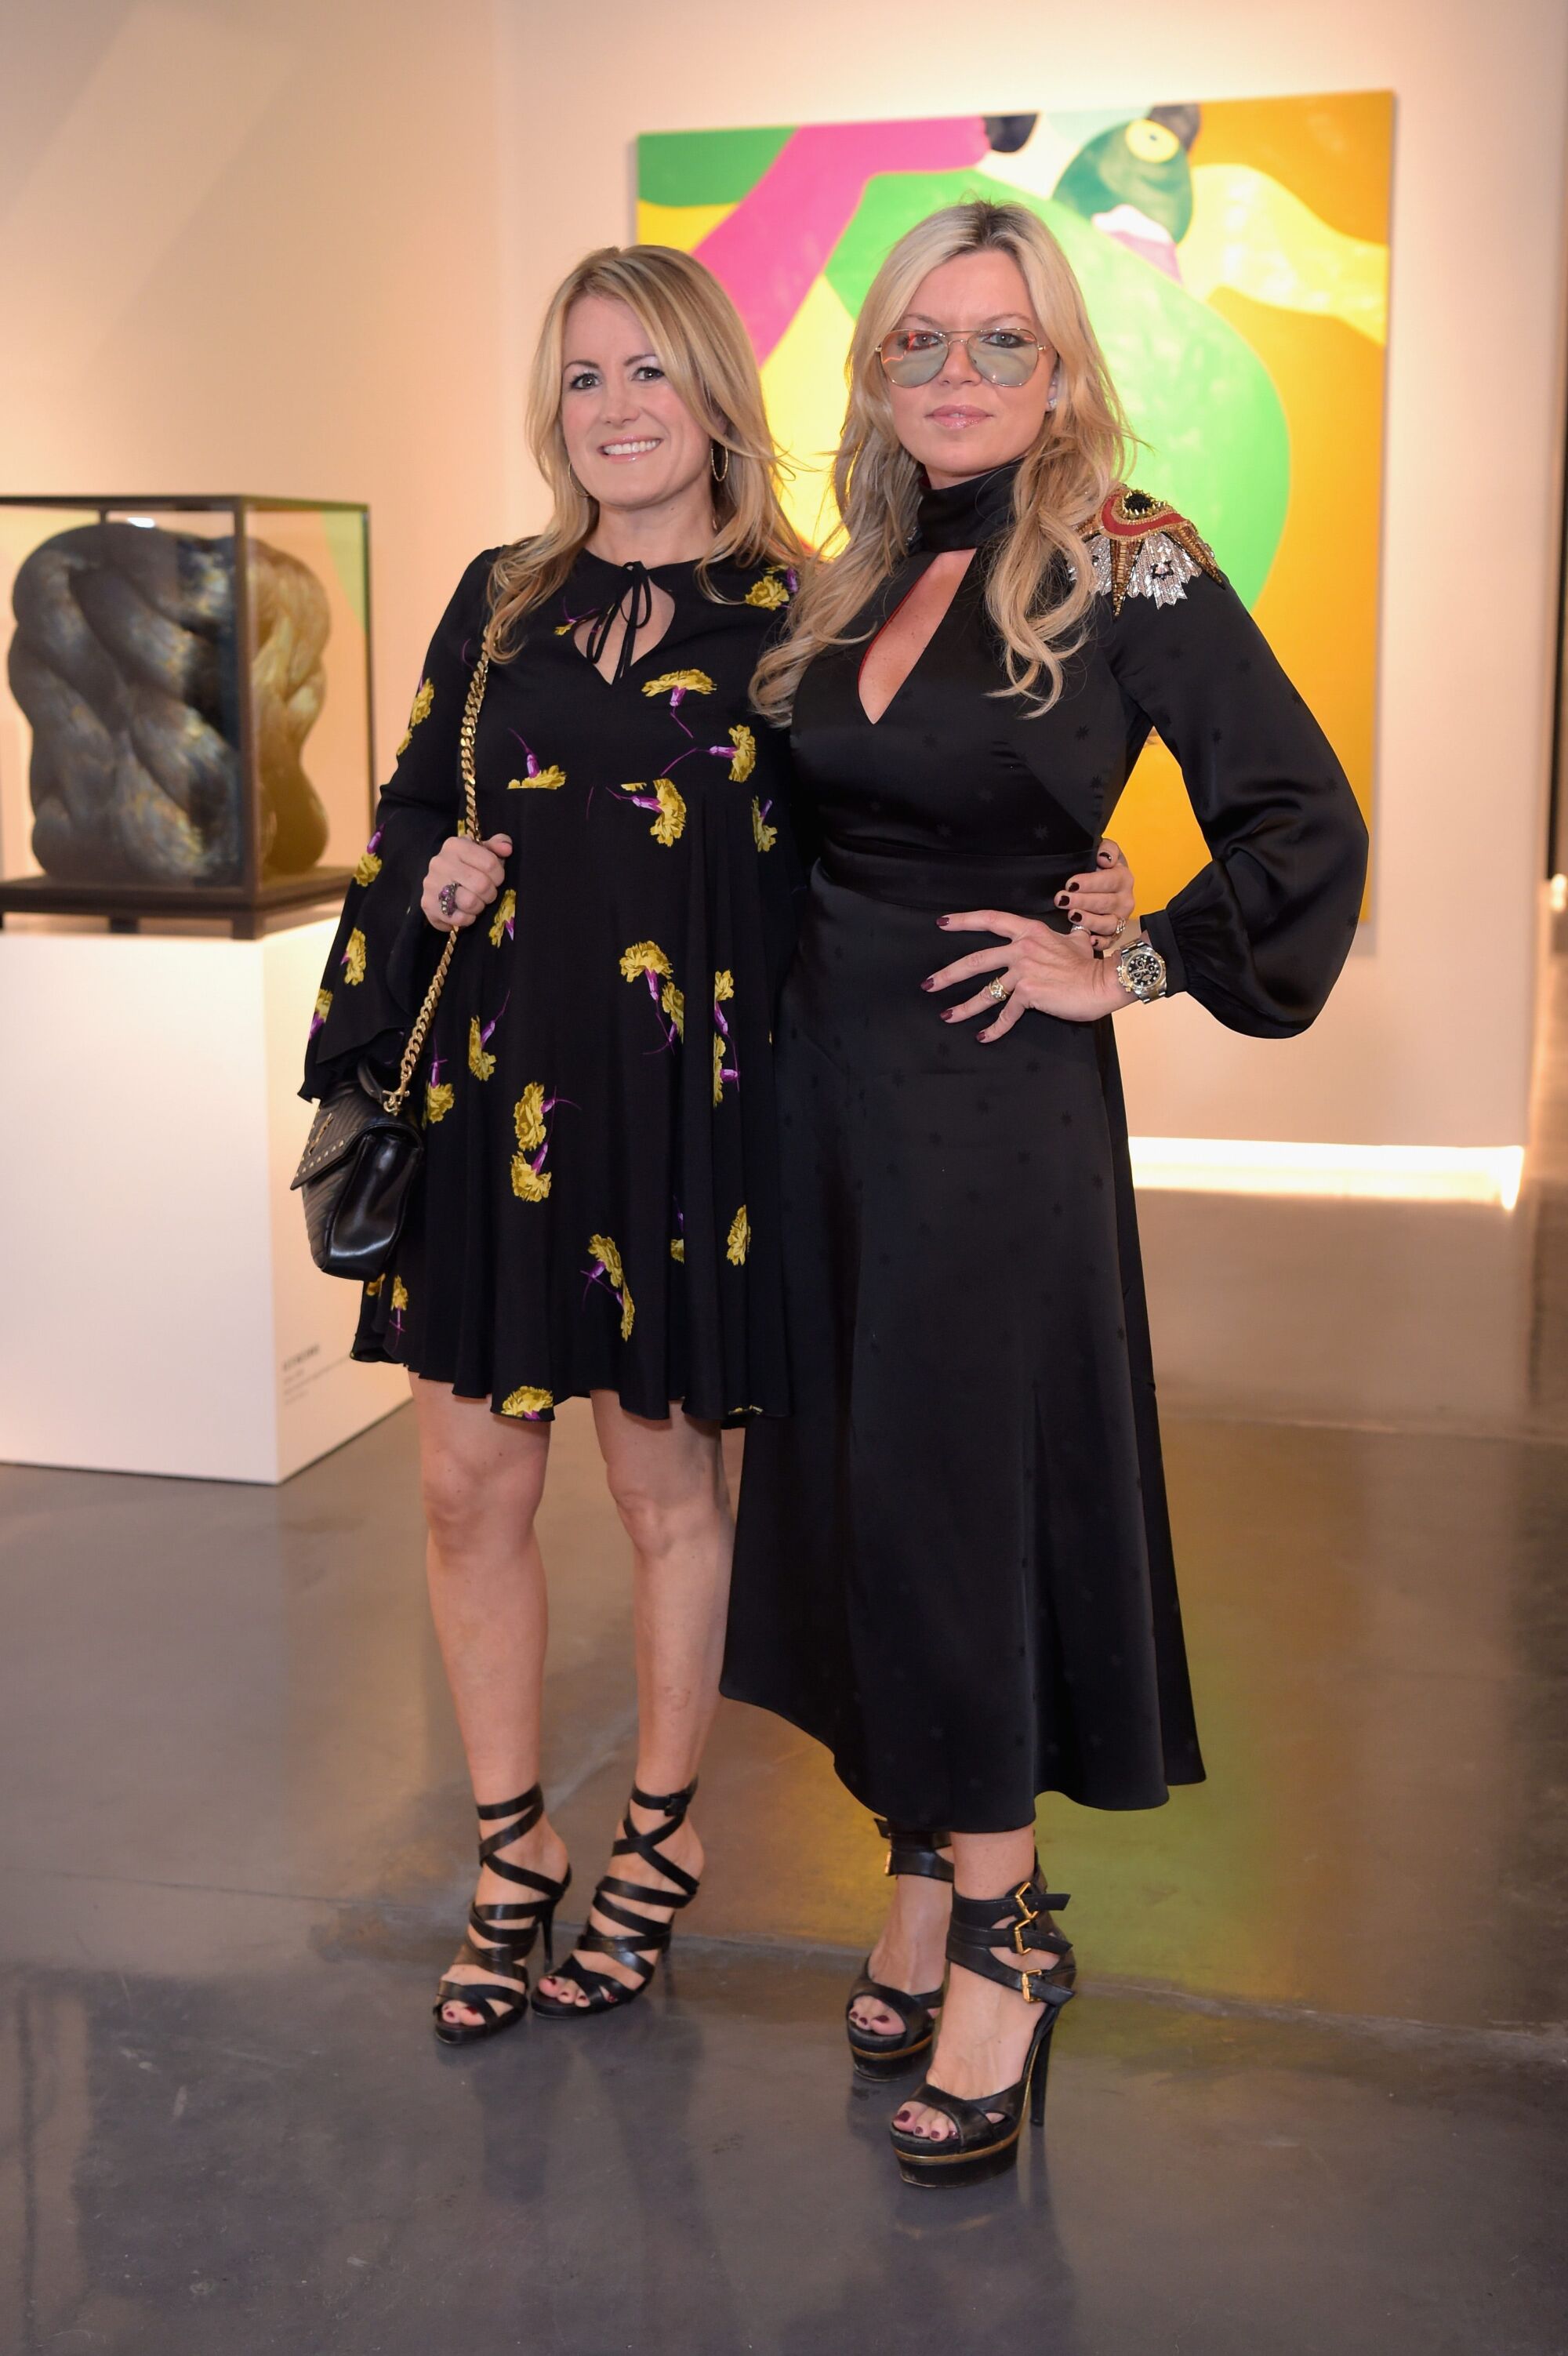 The Wick - LONDON, ENGLAND - OCTOBER 03:  Jane Neal (L) and Fru Tholstrup attend the 21st Century Women VIP preview at Unit London, Mayfair, London  on October 3, 2018 in London, England.  (Pic Credit: Dave Benett)